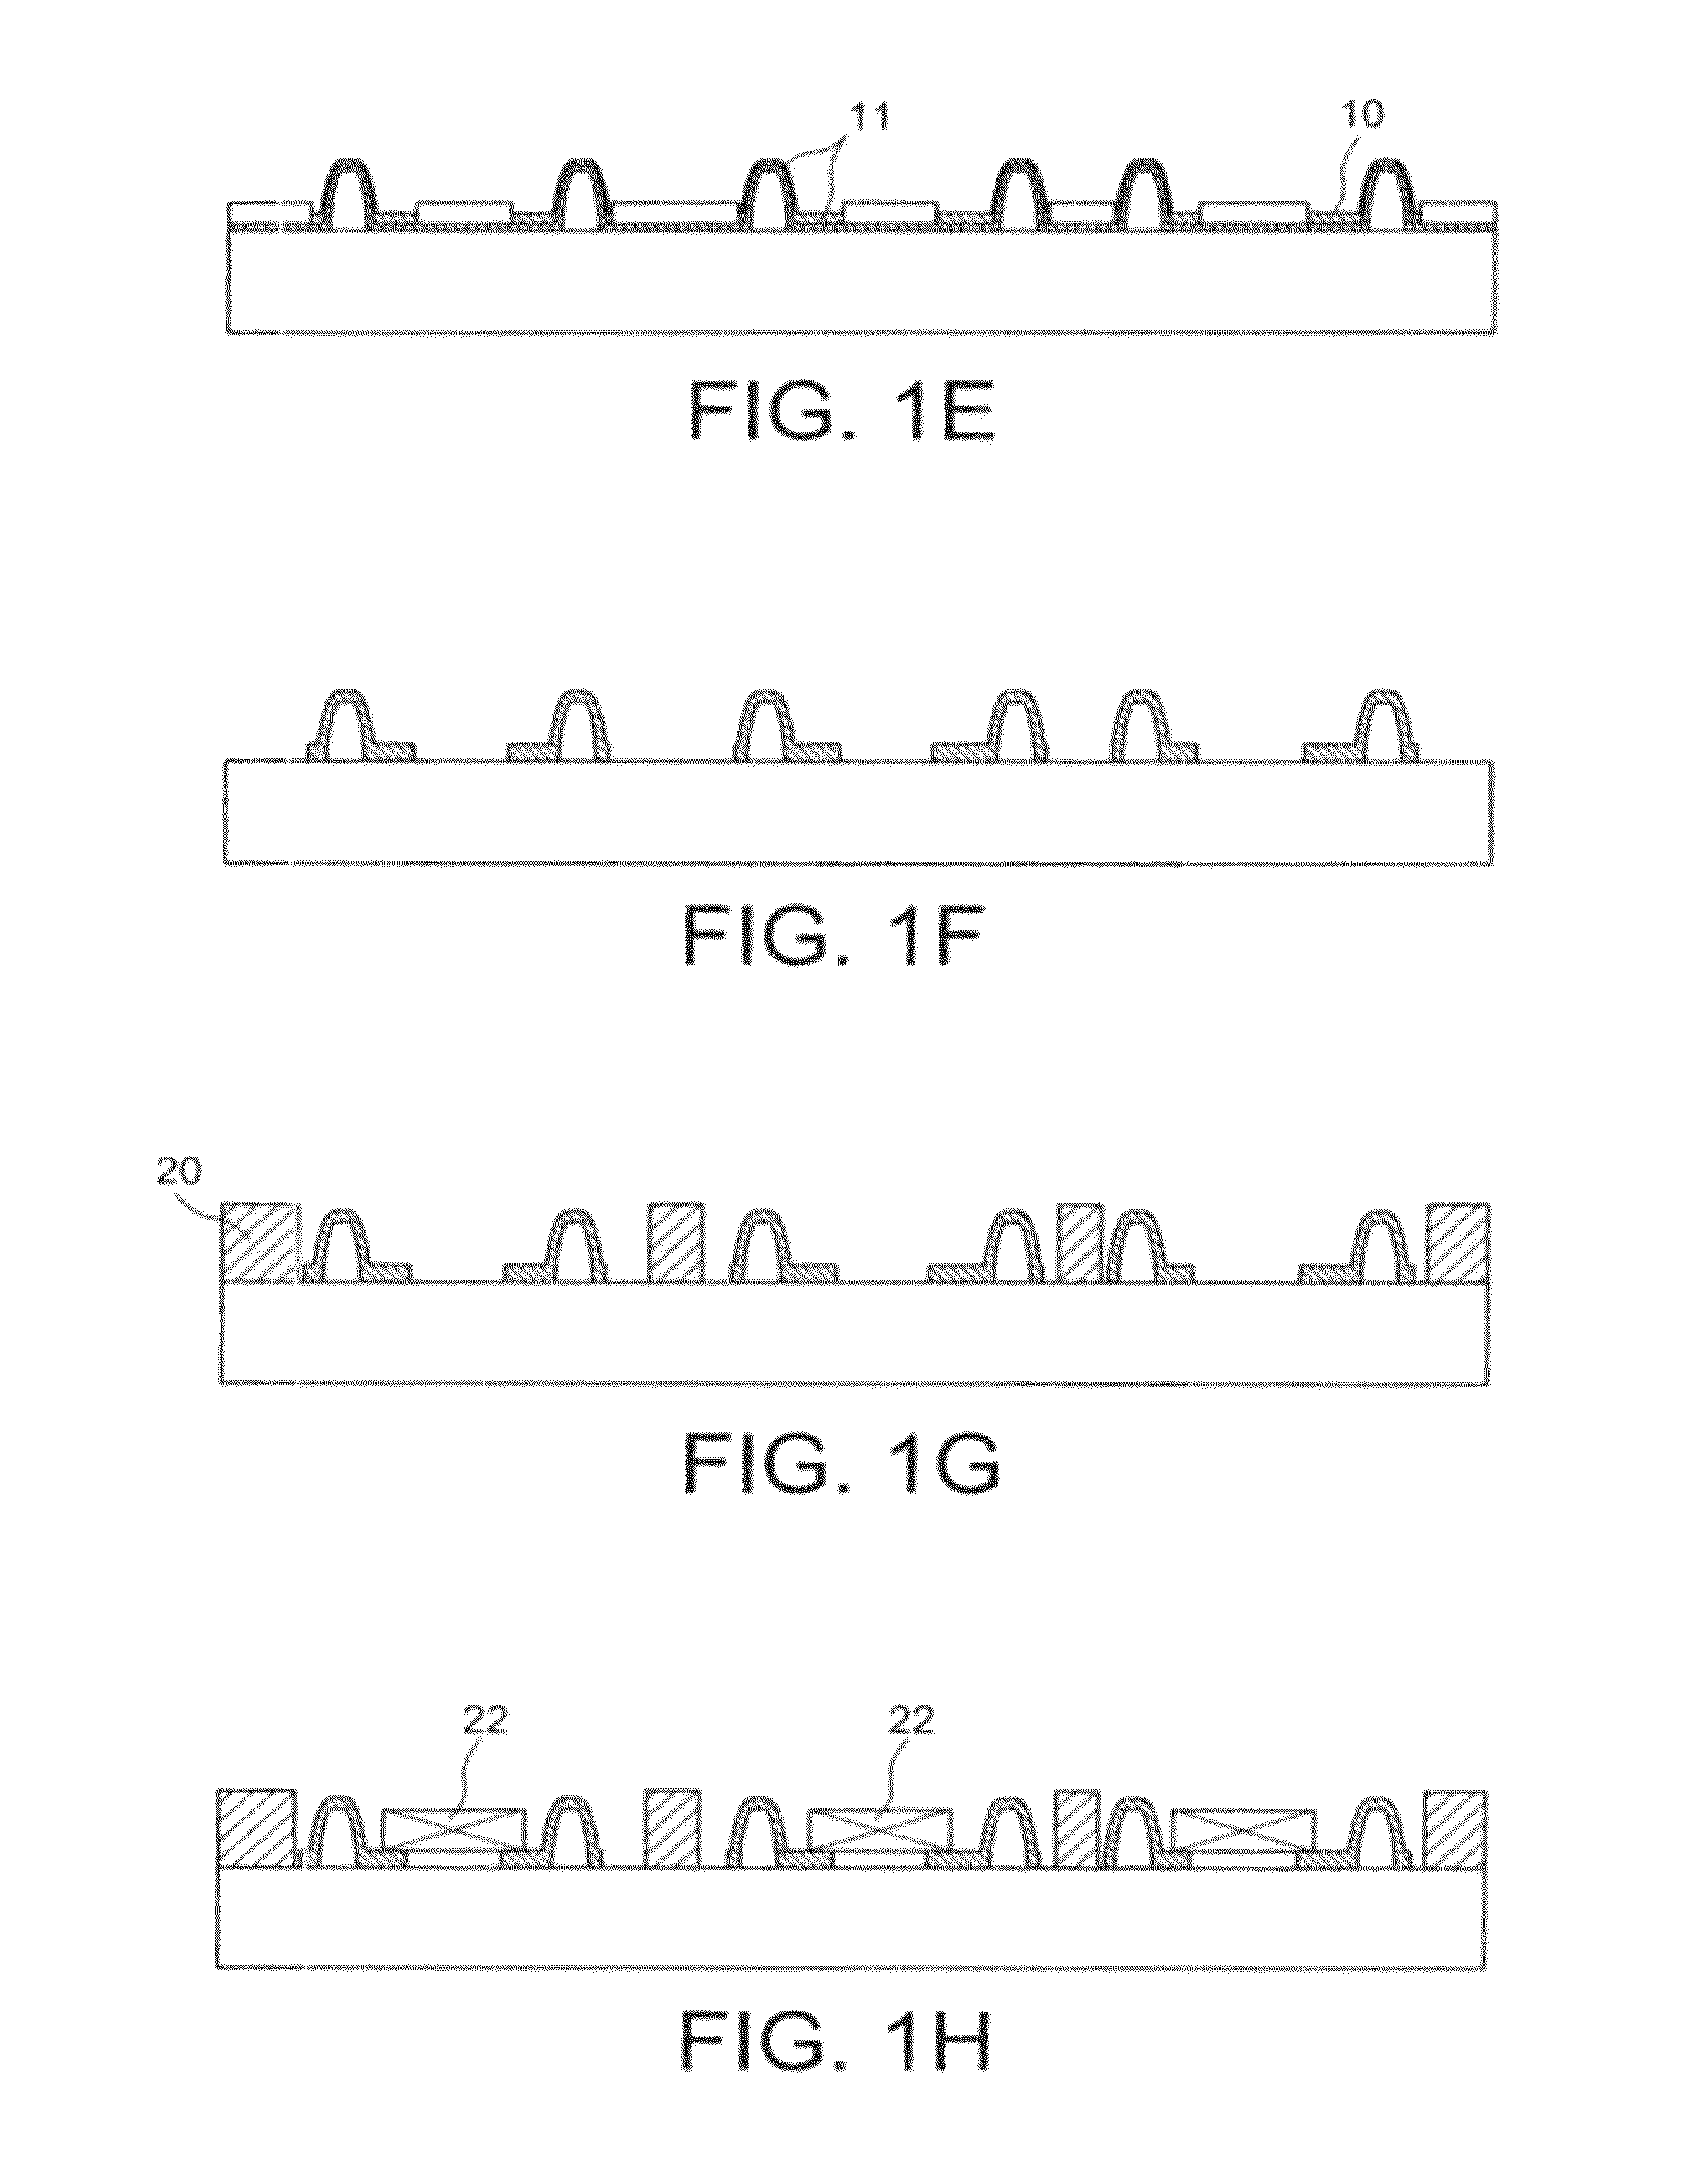 Method of producing a via in a reconstituted substrate